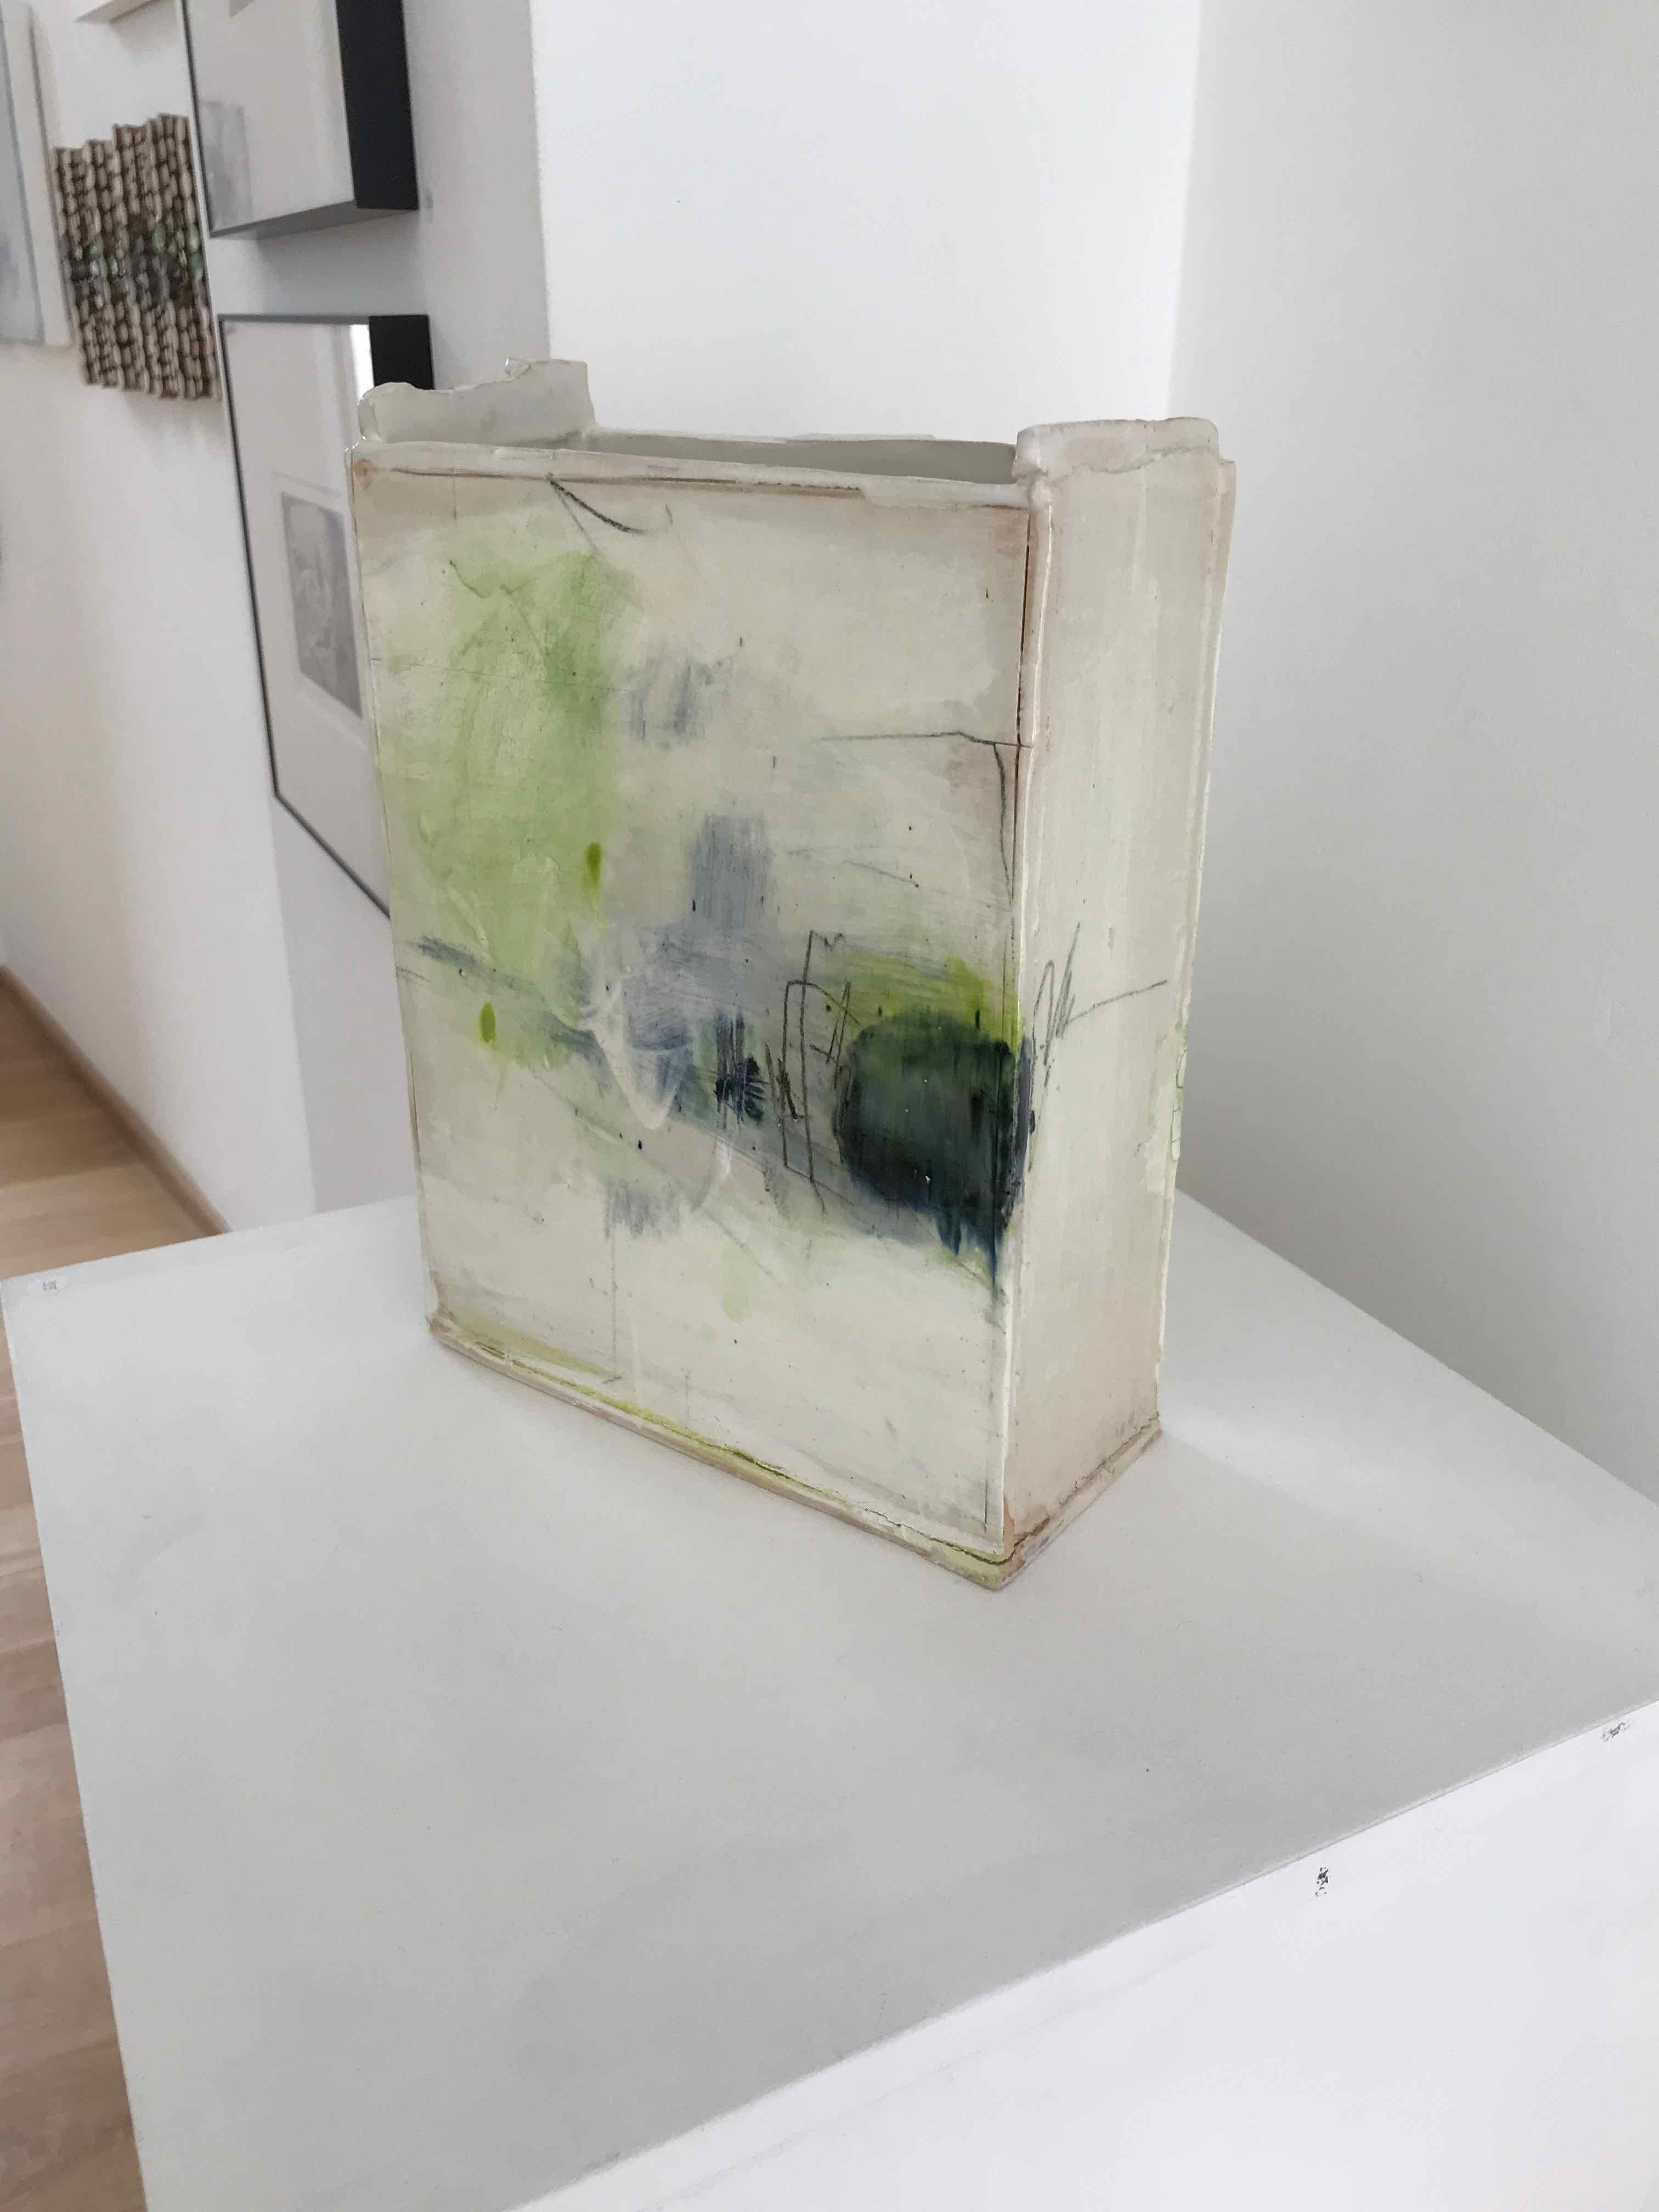 This ceramic vessel is one of Barry’s larger slab works, which are three-dimensional paintings that you can walk around, and view from many angles.

Barry Stedman’s ceramics are influenced by drawings made within the land, exploring relationships